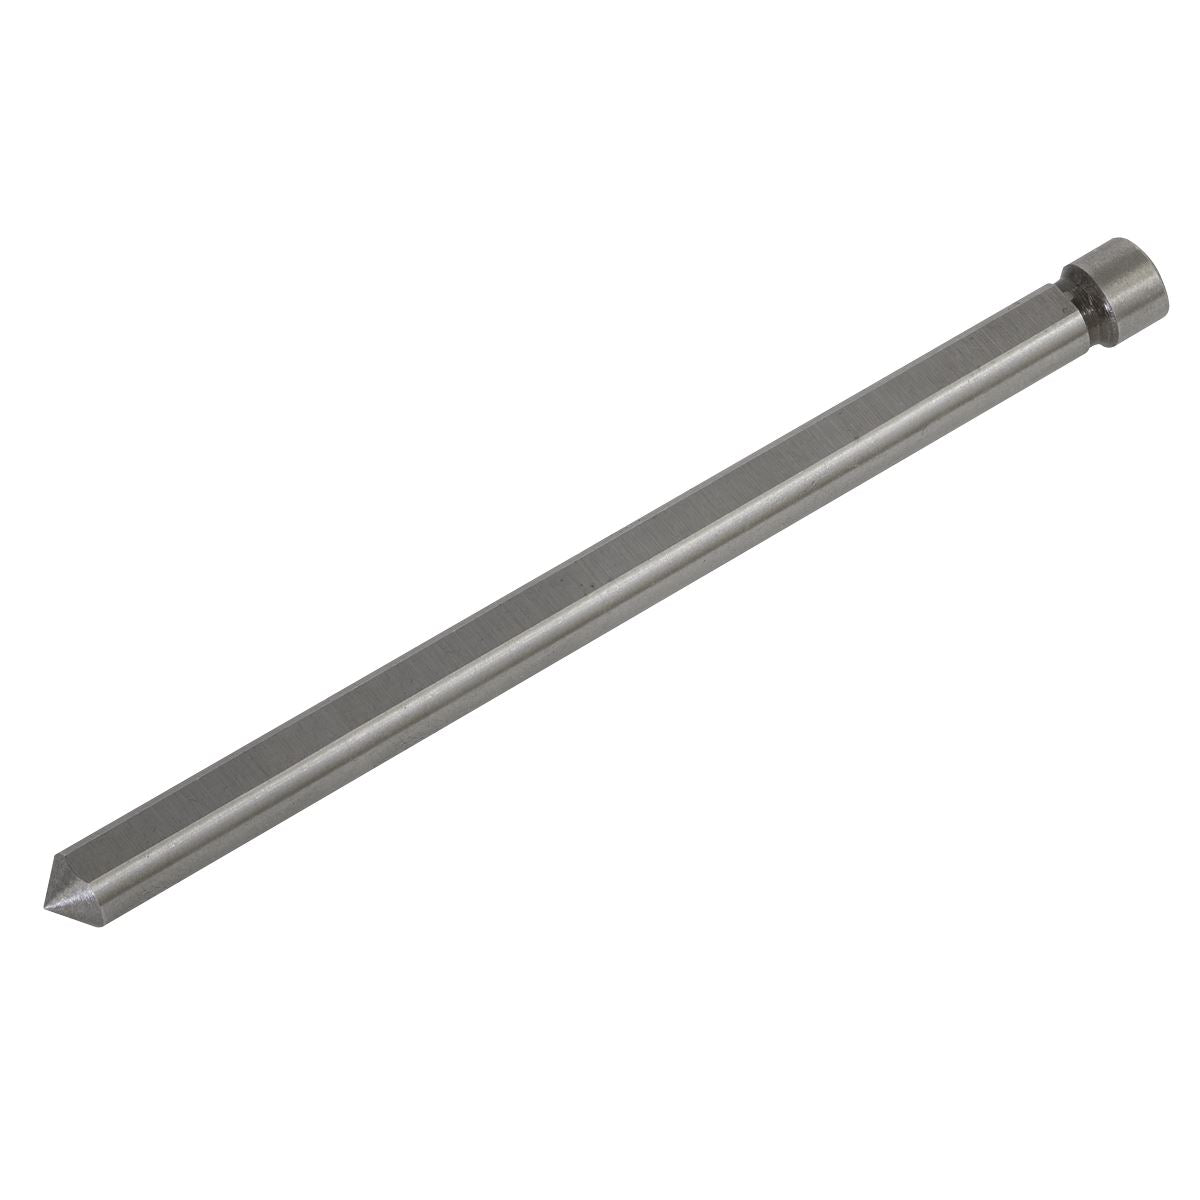 Worksafe by Sealey Long Straight Pin Pilot Rod 102mm